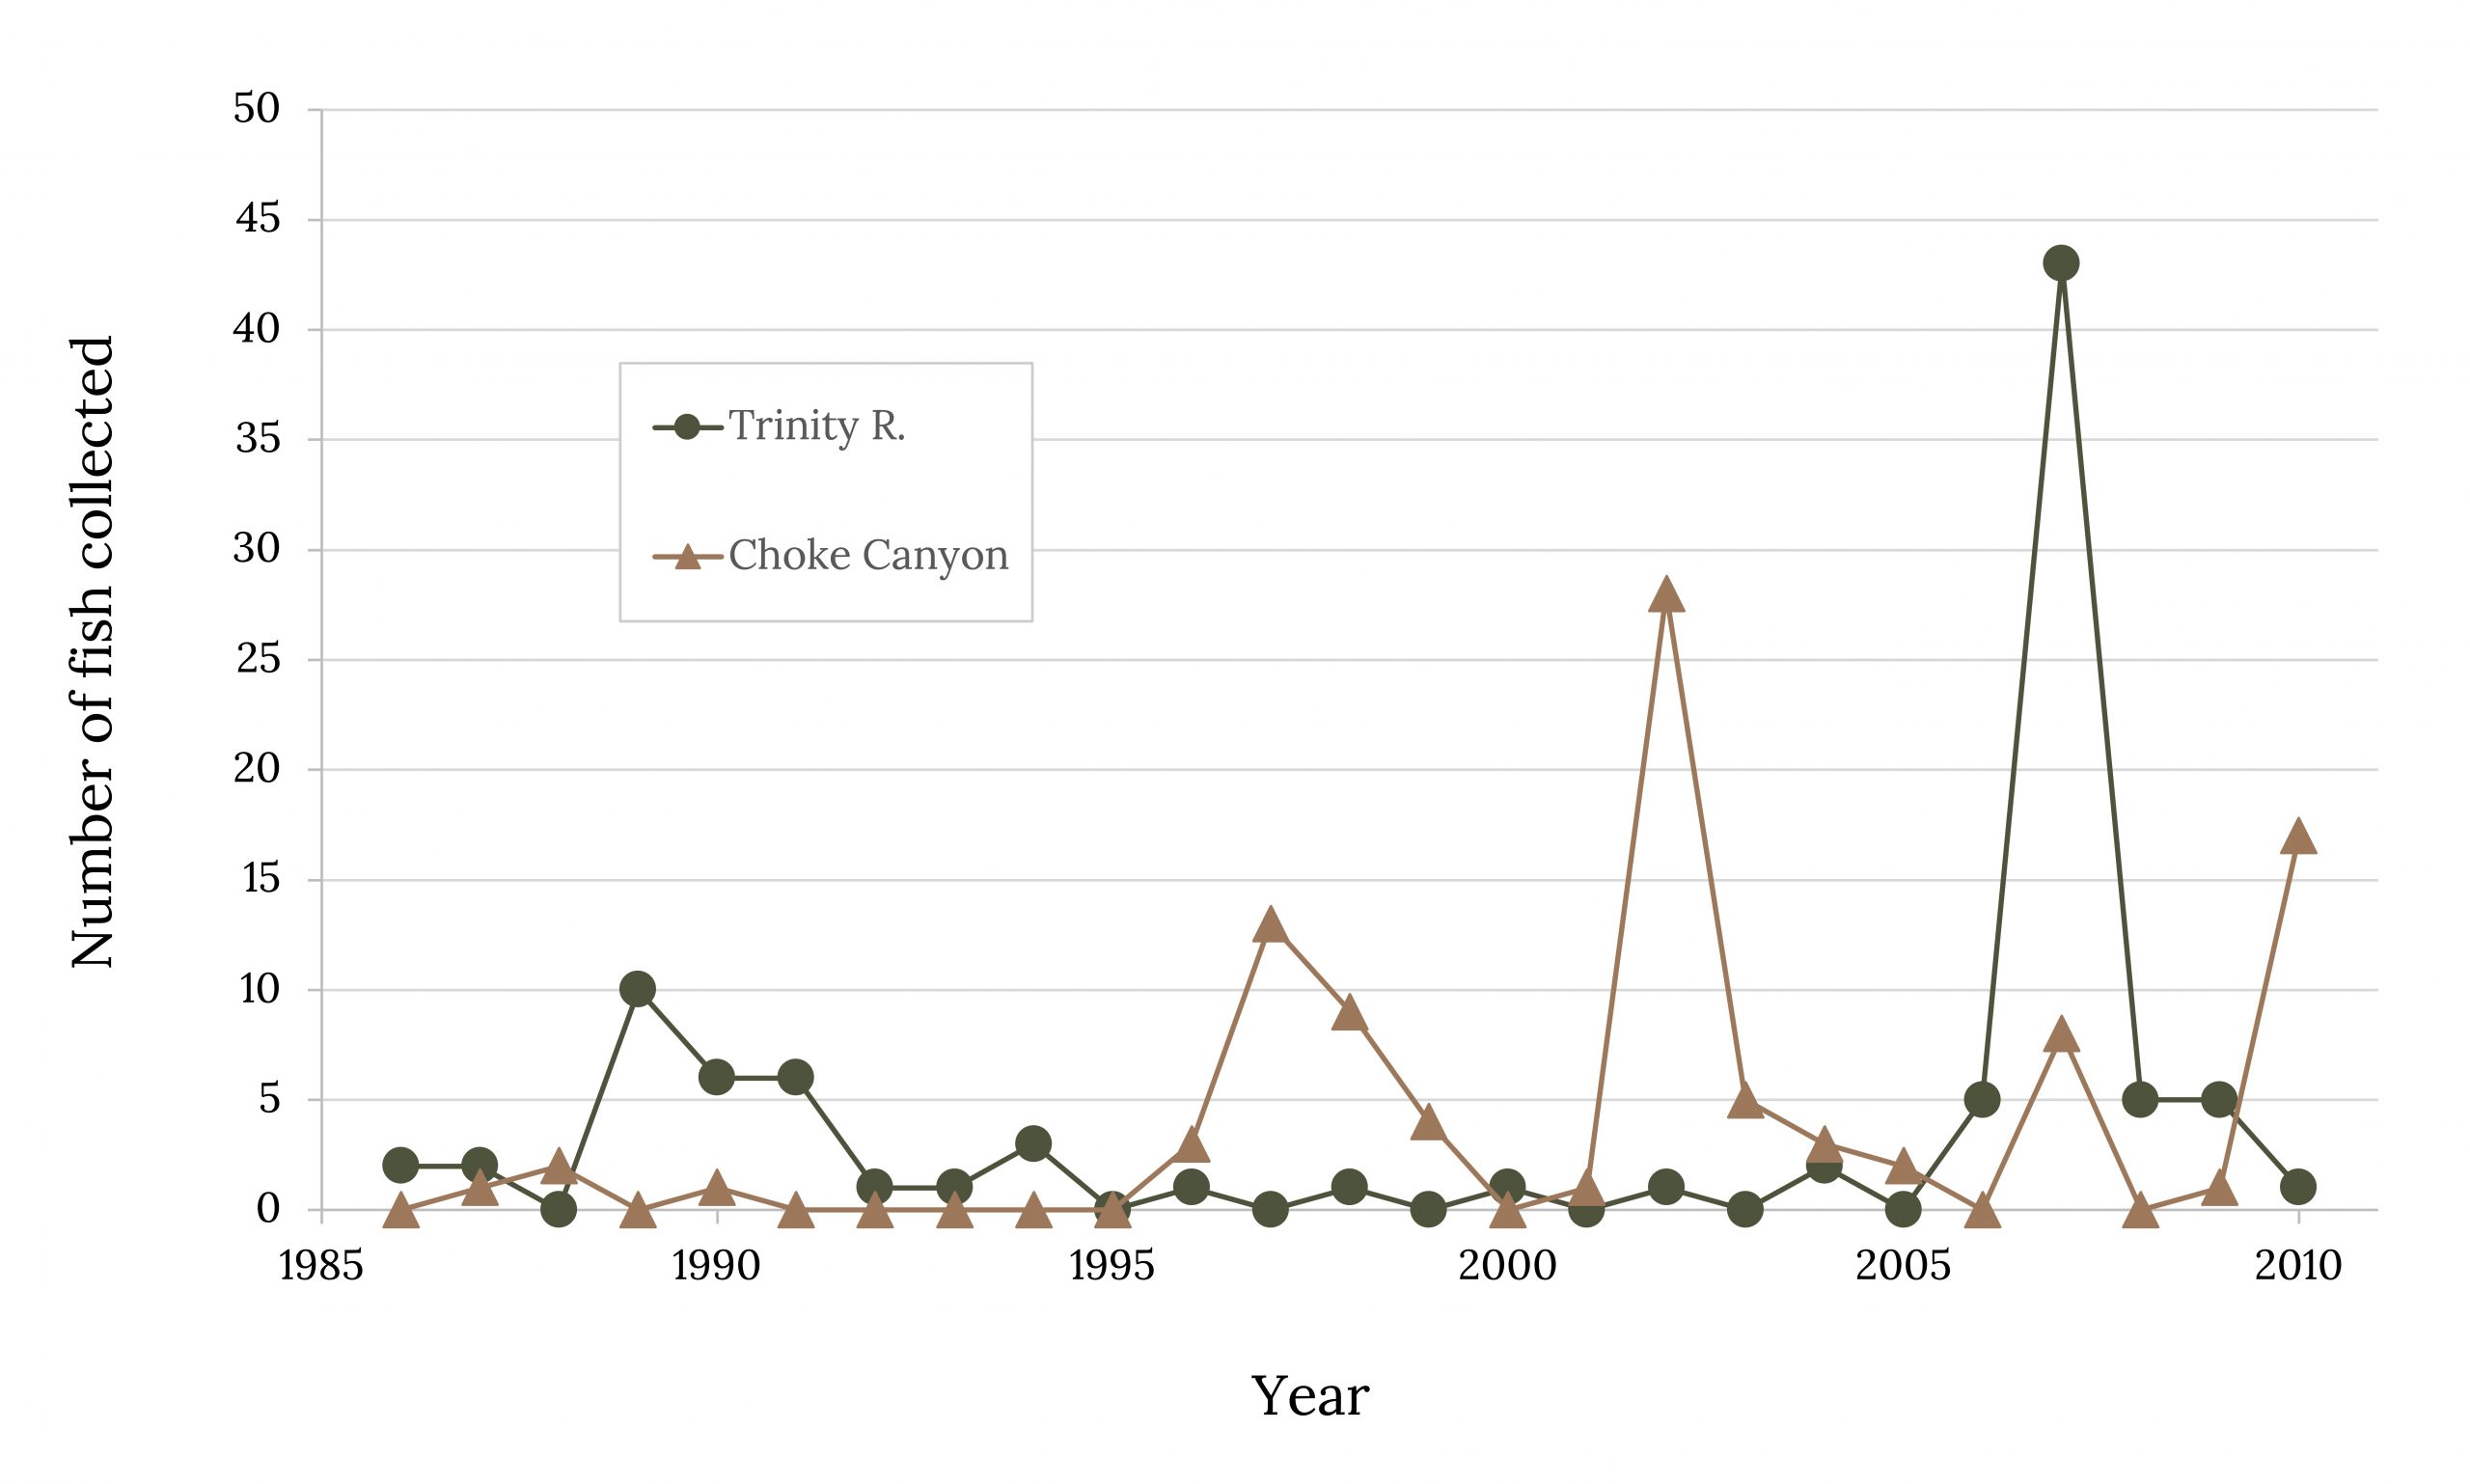 Variation in recruitment of two populations of Alligator Gar from 1985 to 2010